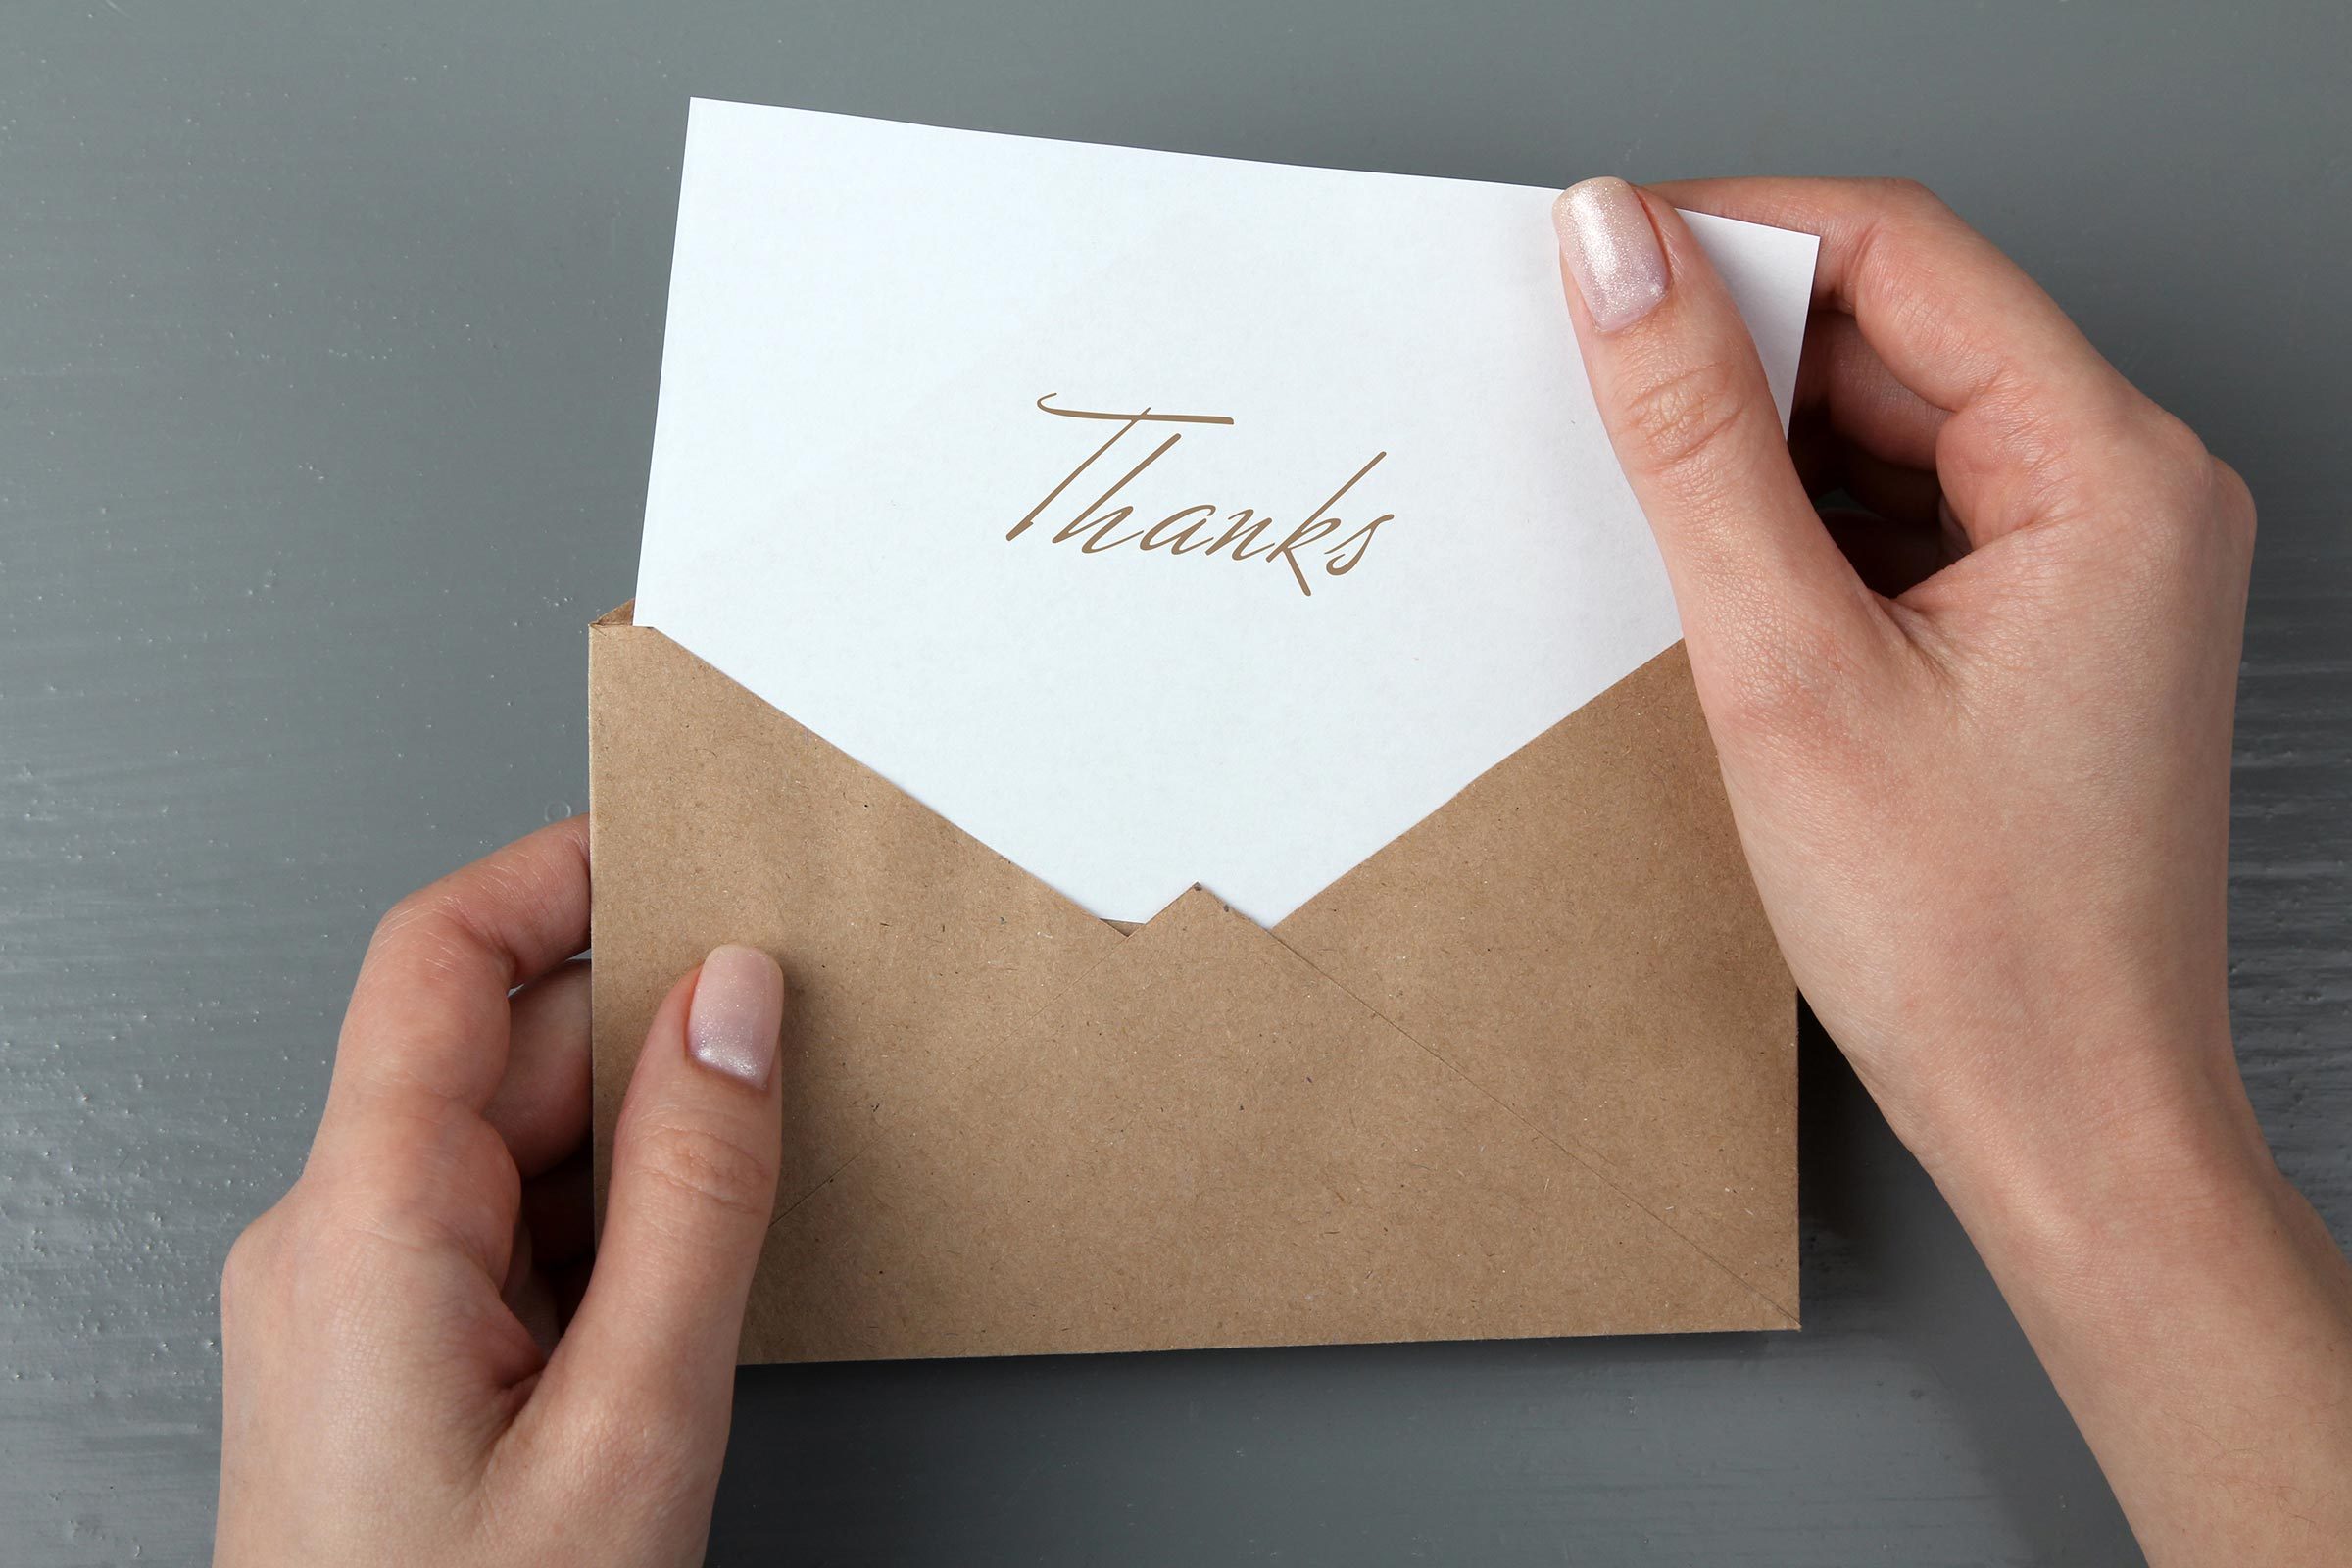 Thank you for listening Card - Appreciation Card friendship notes